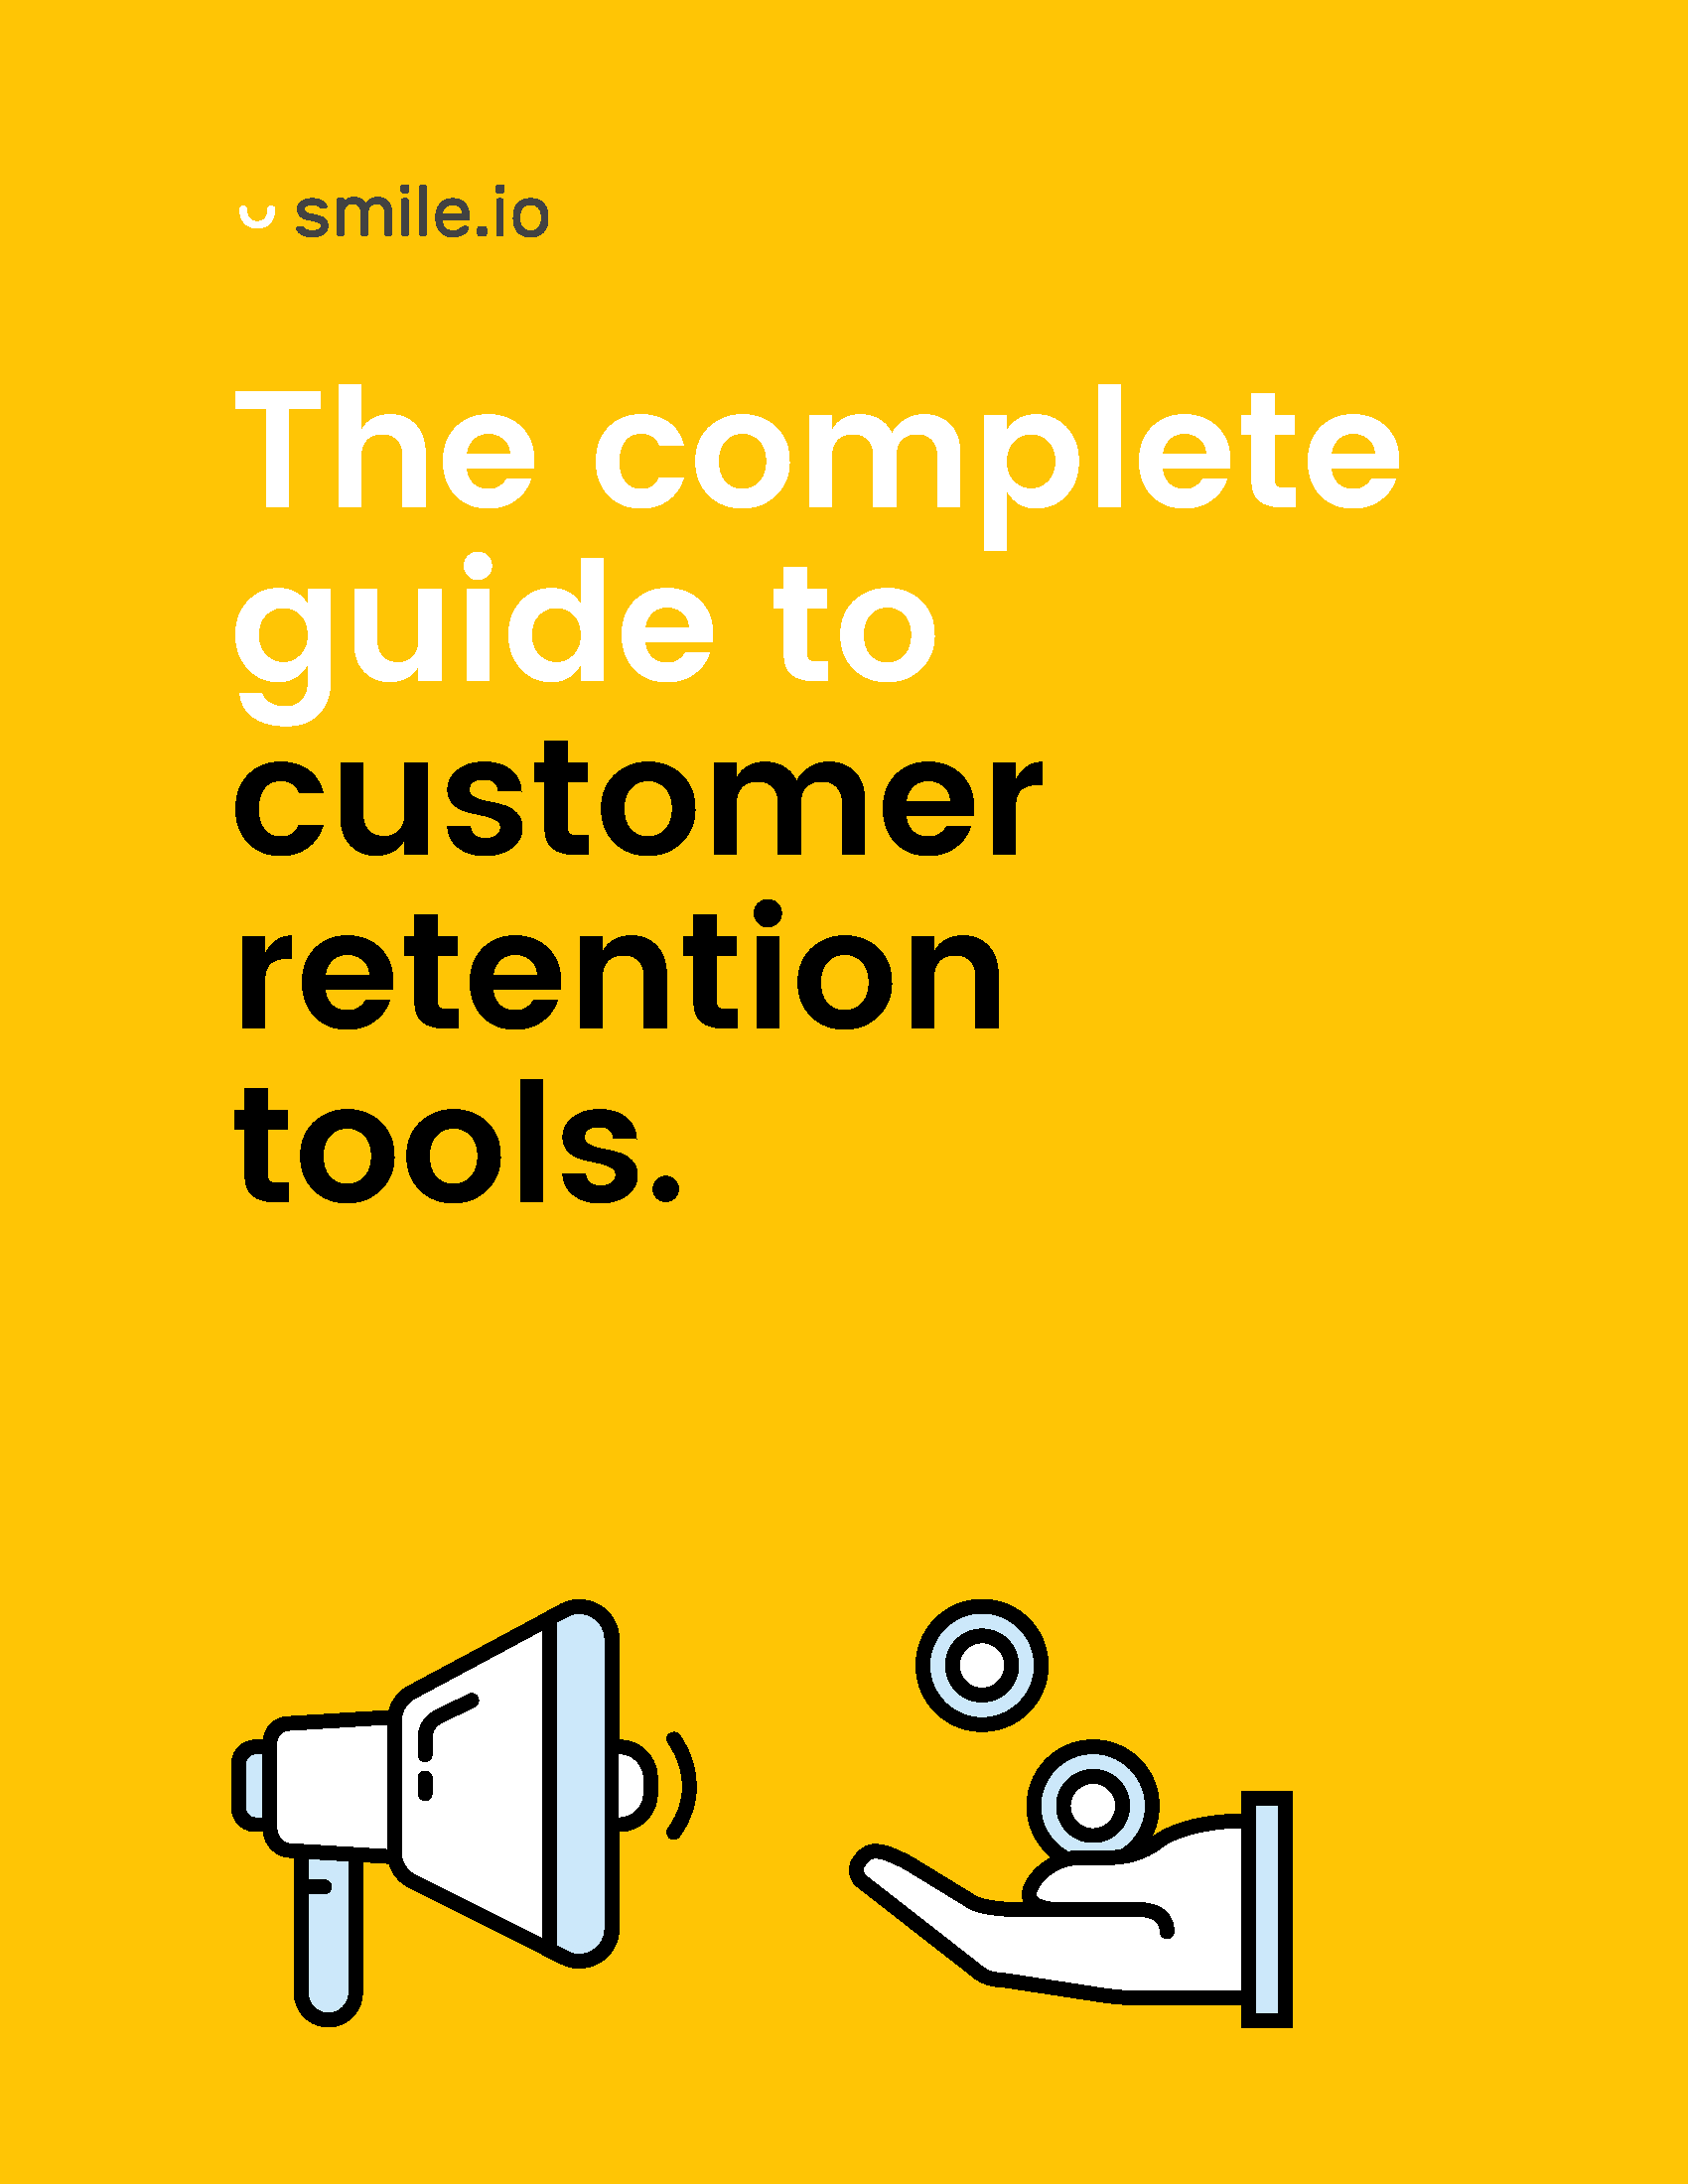 The Complete Guide to Customer Retention Tools